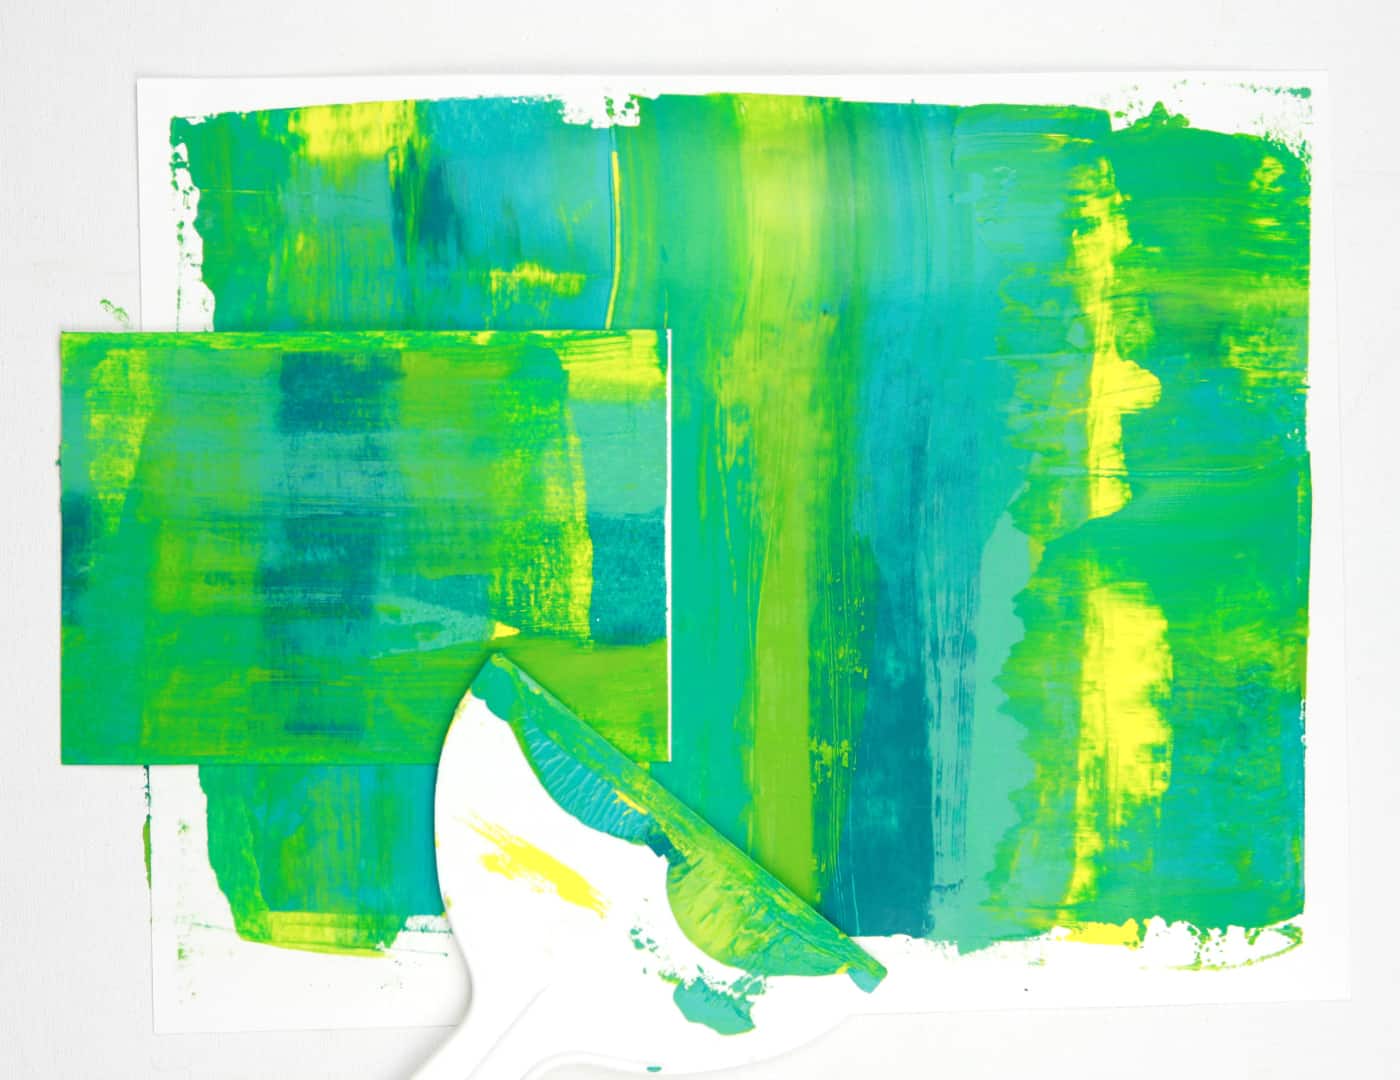 acrylic paint scraoped across paper in greens and yellows